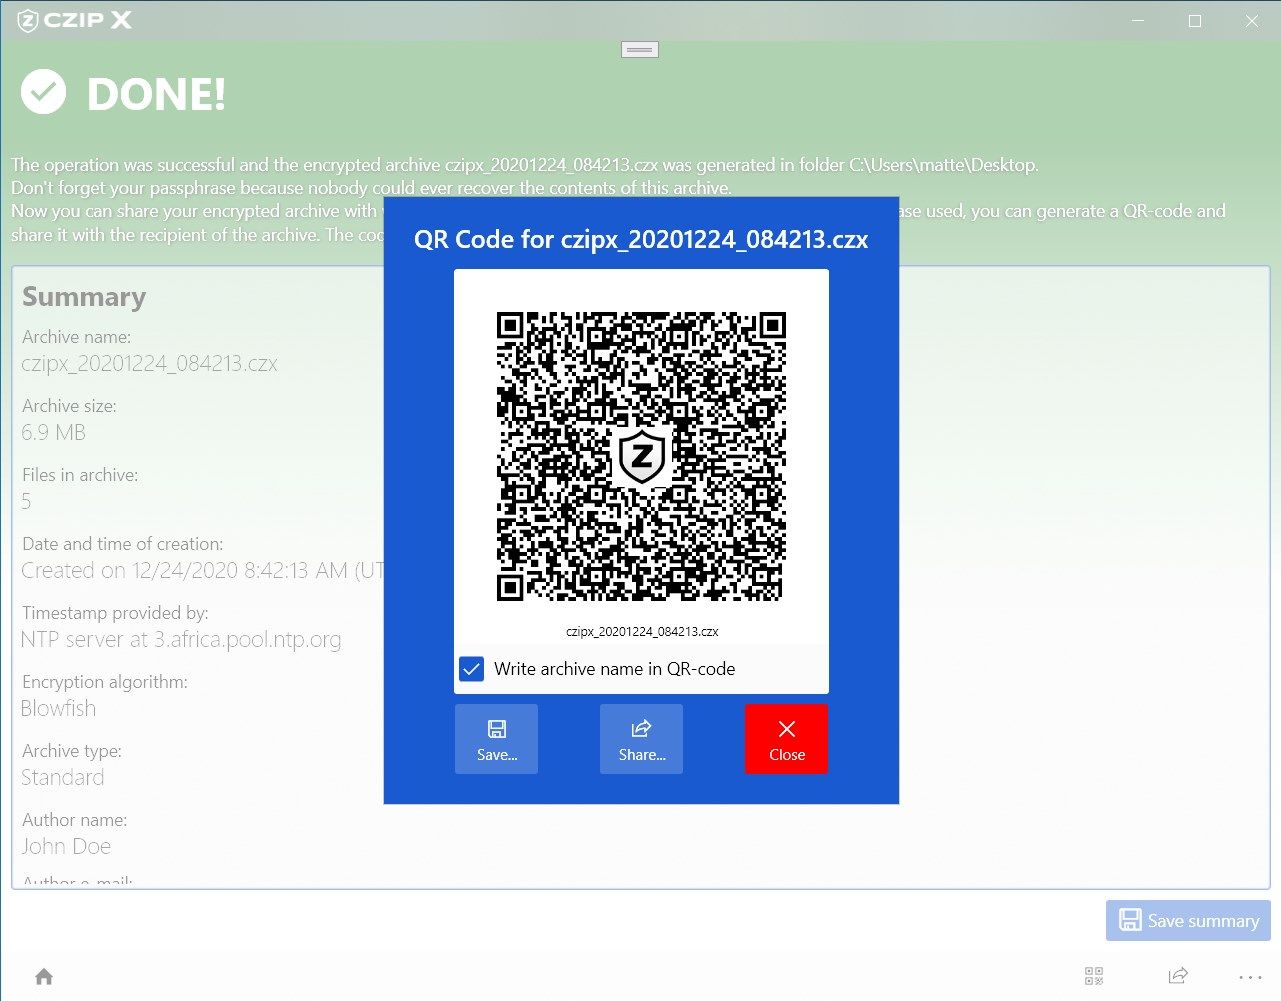 QR code that can be used to share the passphrase without telling it